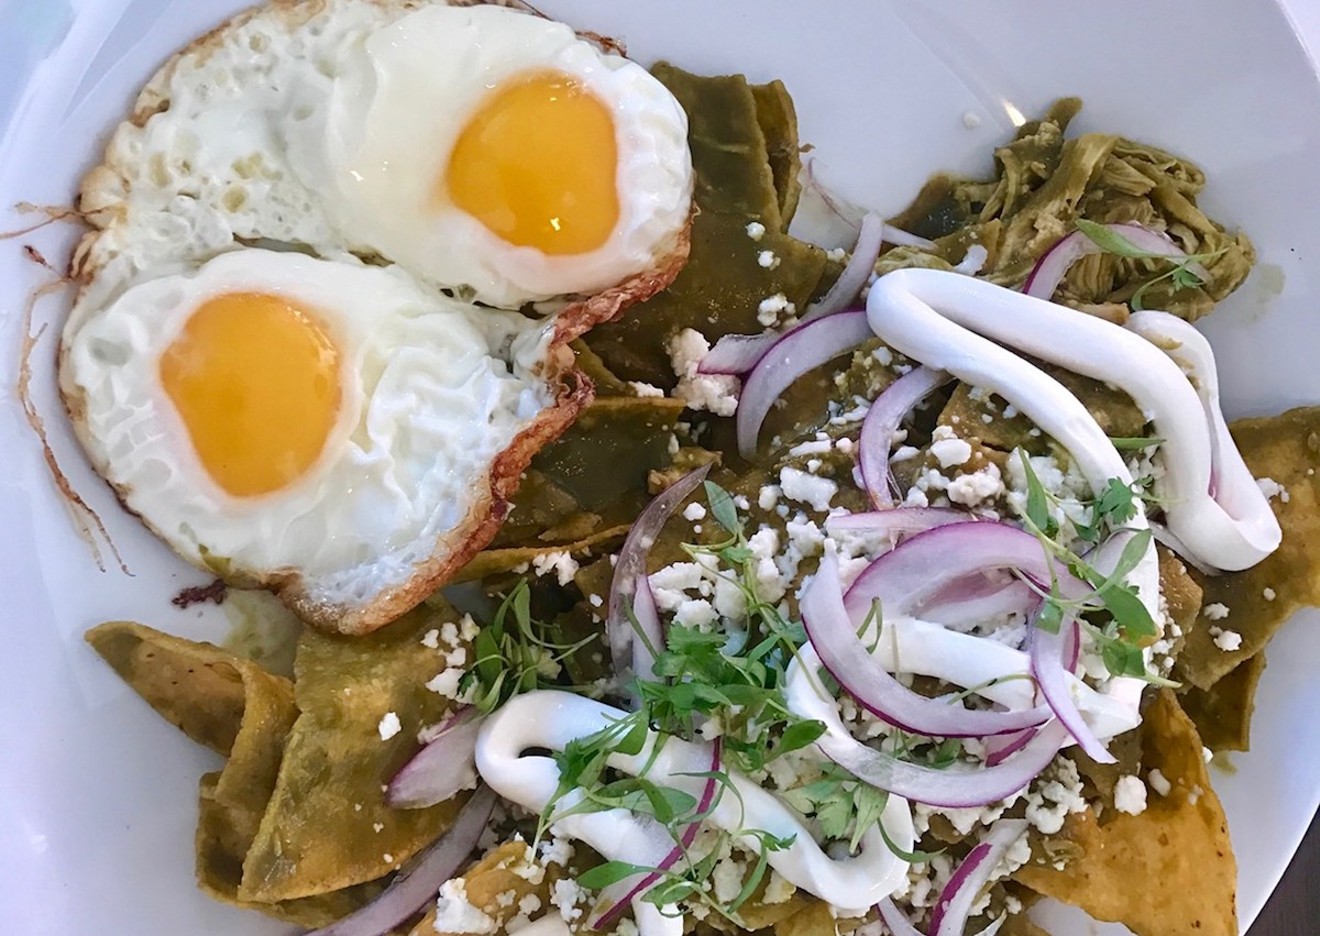 Chilaquiles: Tortilla chips, shredded chicken, sunny-side up eggs, queso fresco, sour cream, ranchero sauce, and poblano sauce.